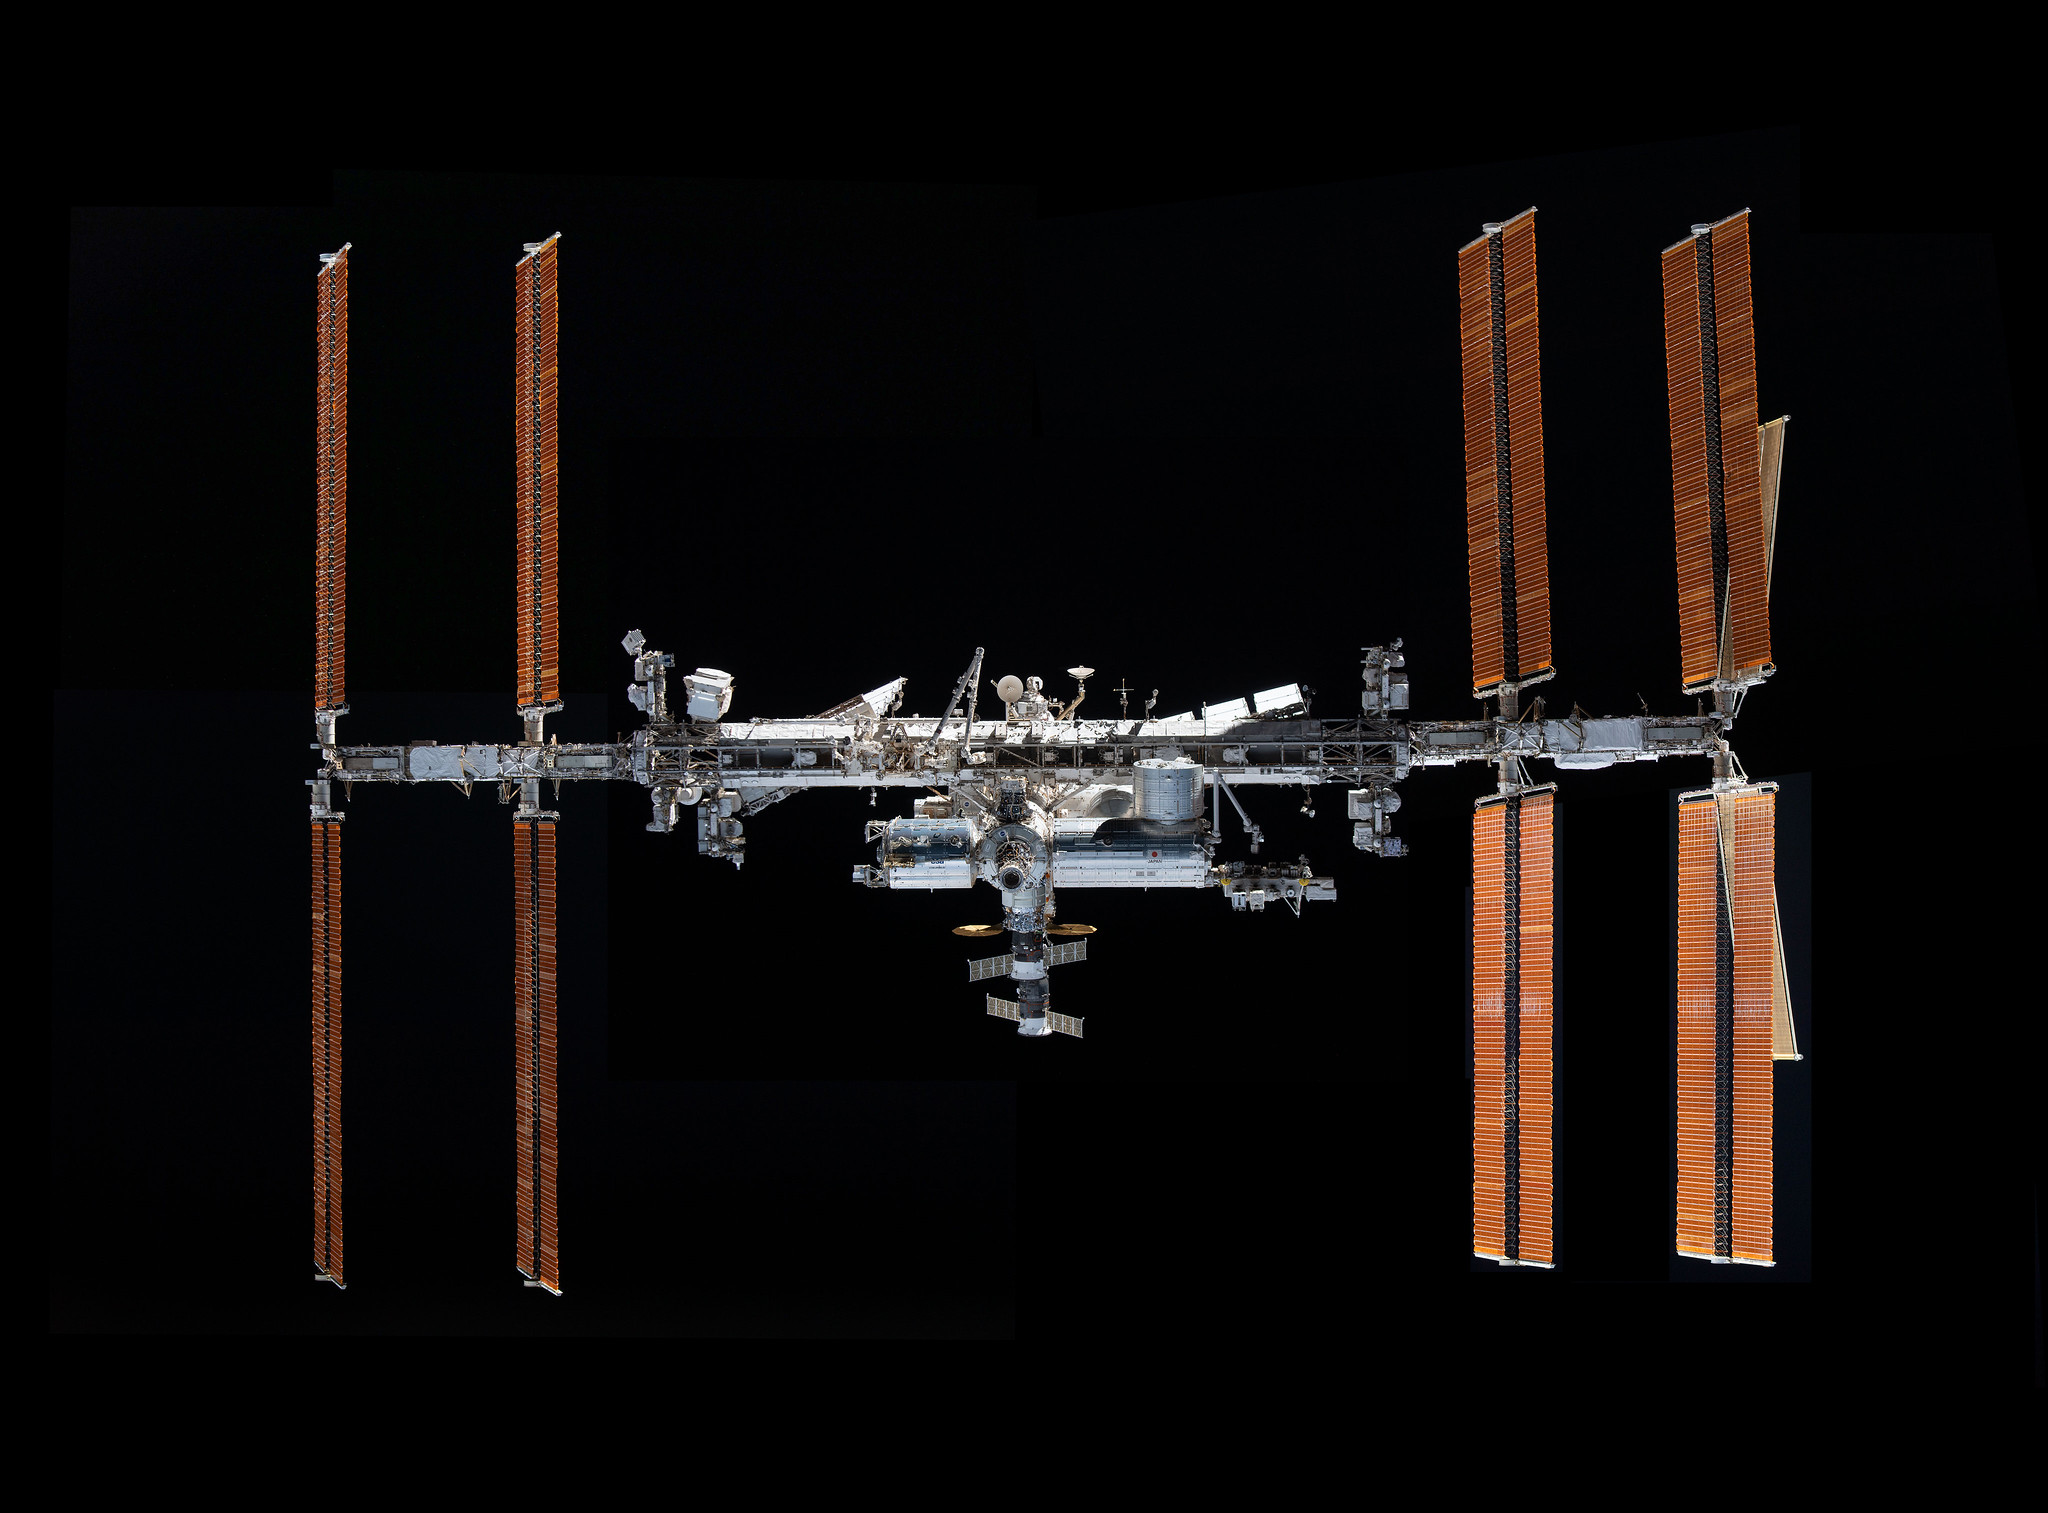 Houston We Have a Podcast: Continuous Human Presence on the International Space Station